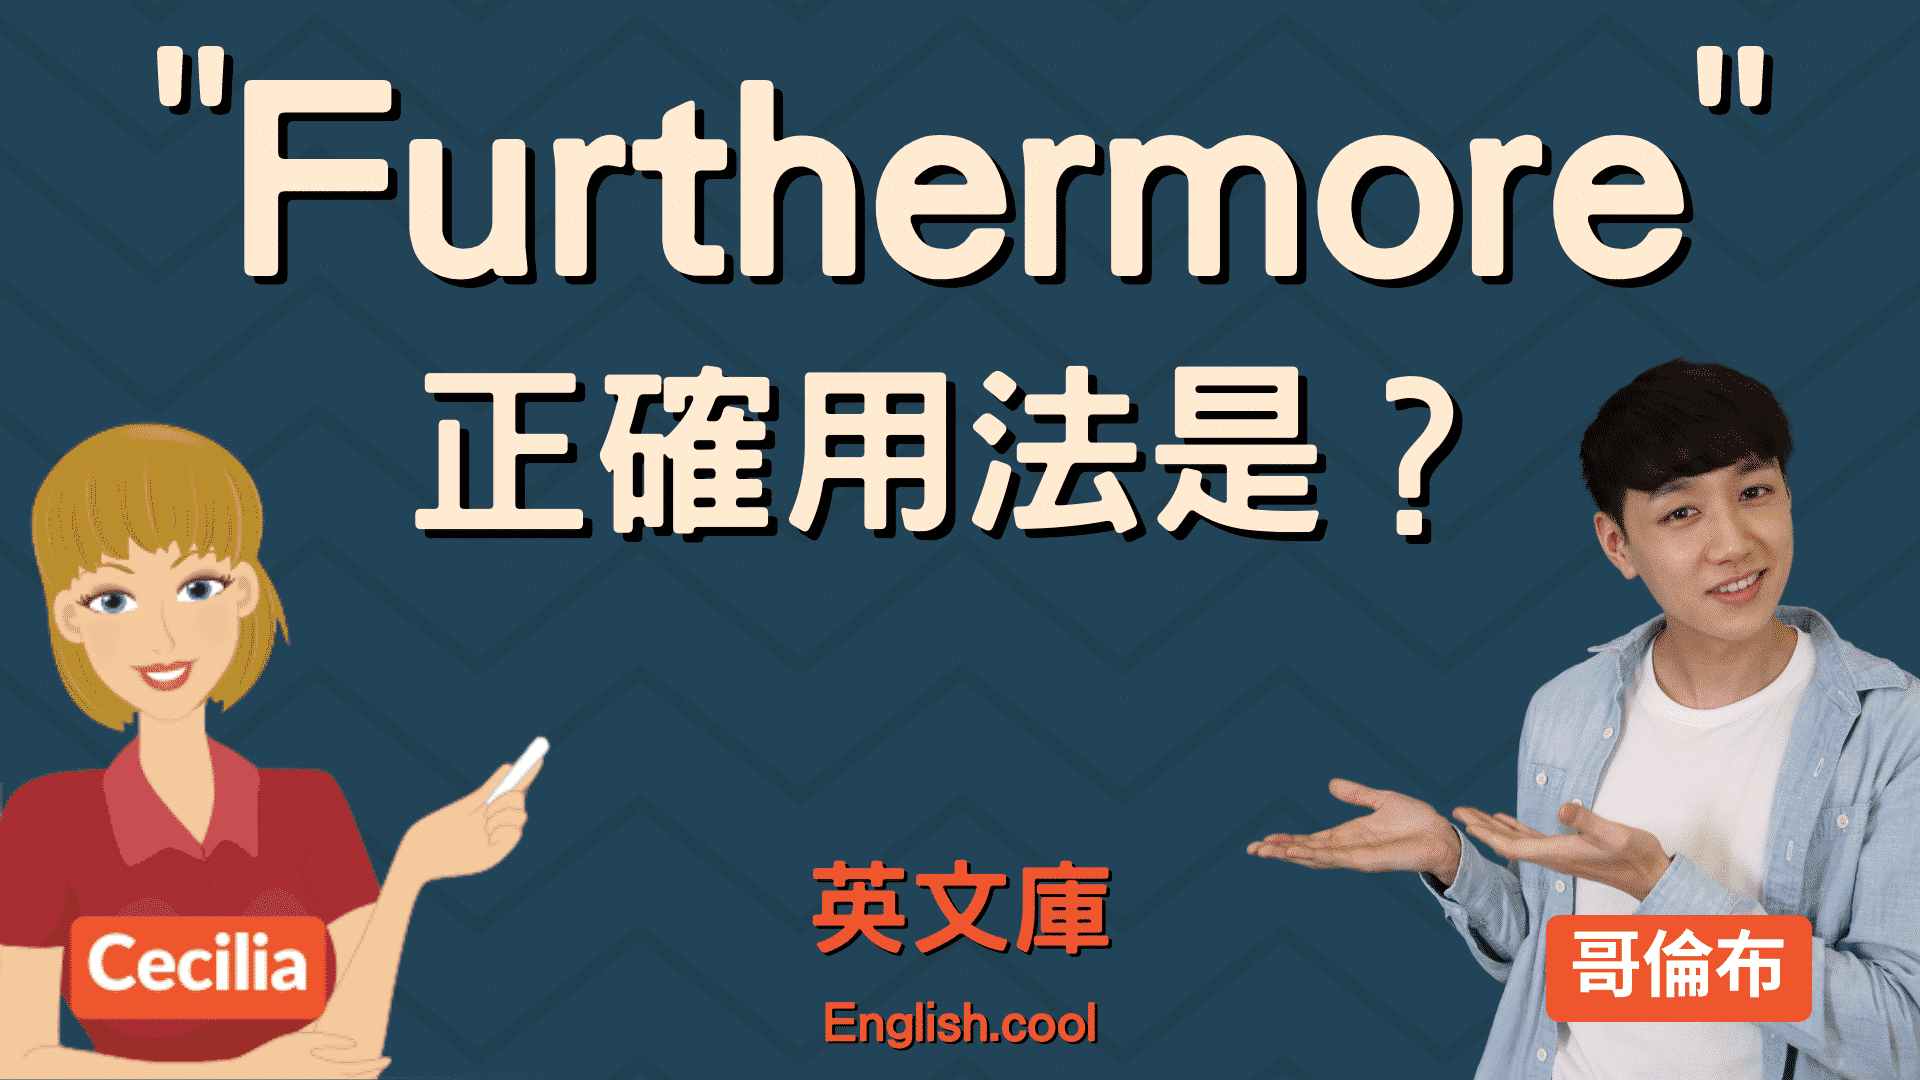 You are currently viewing 「furthermore」正確用法是？來看例句一次搞懂！